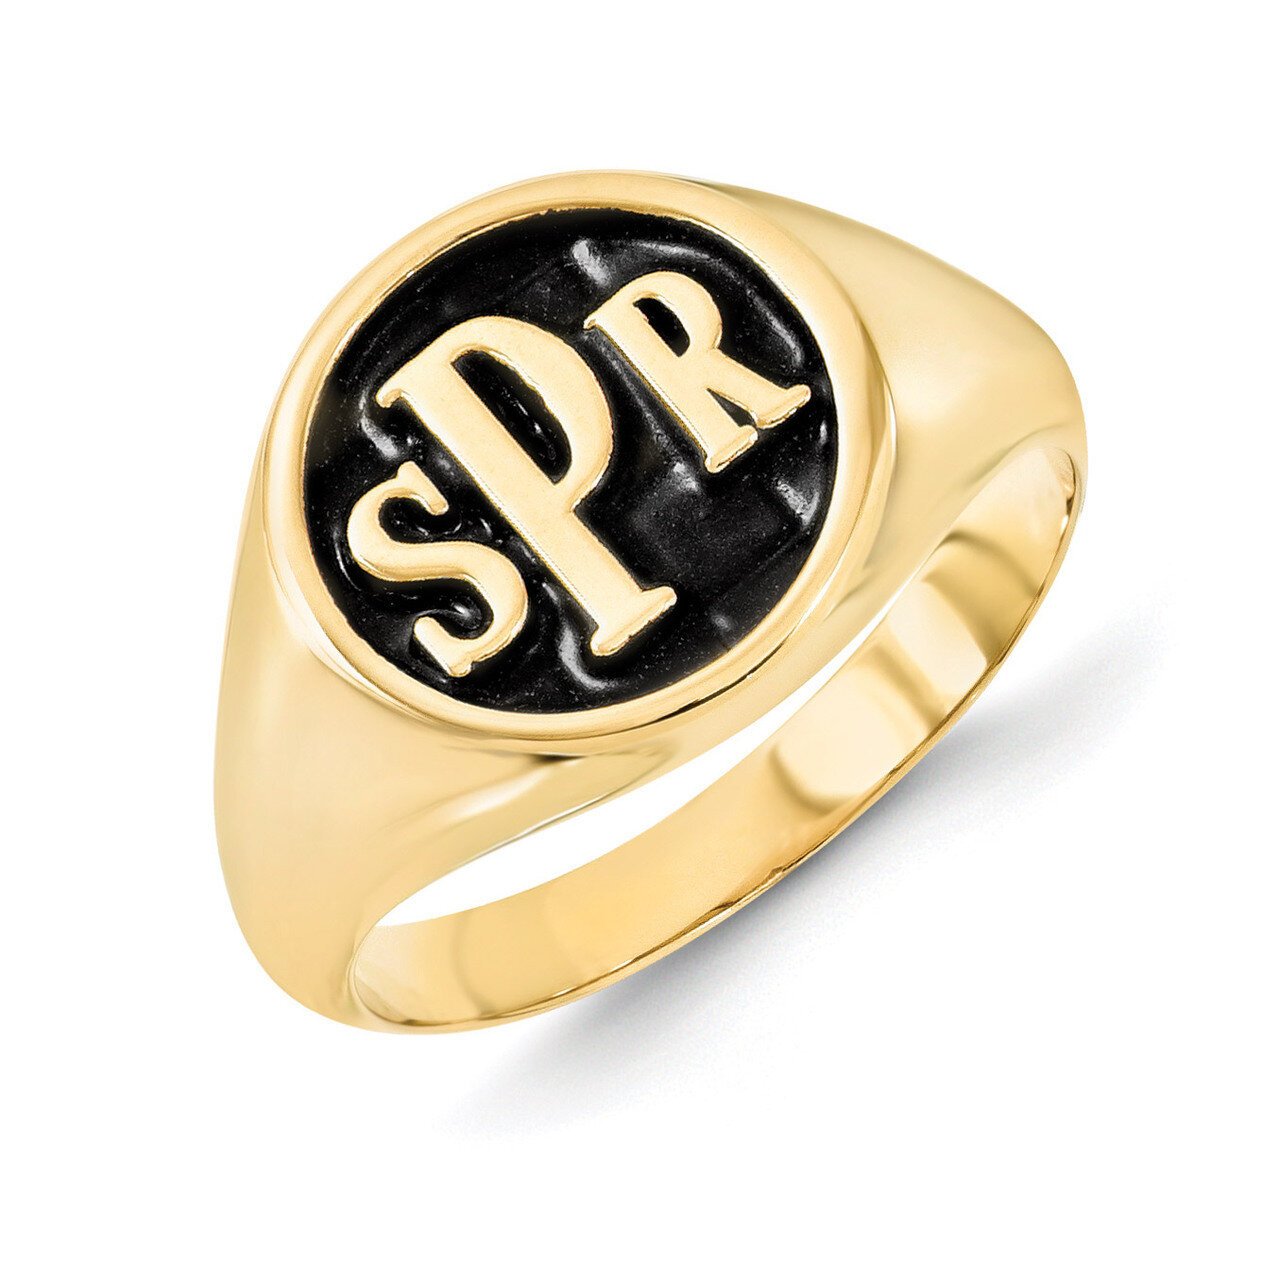 Monogram Signet Ring Gold-plated Sterling Silver XNR44GP